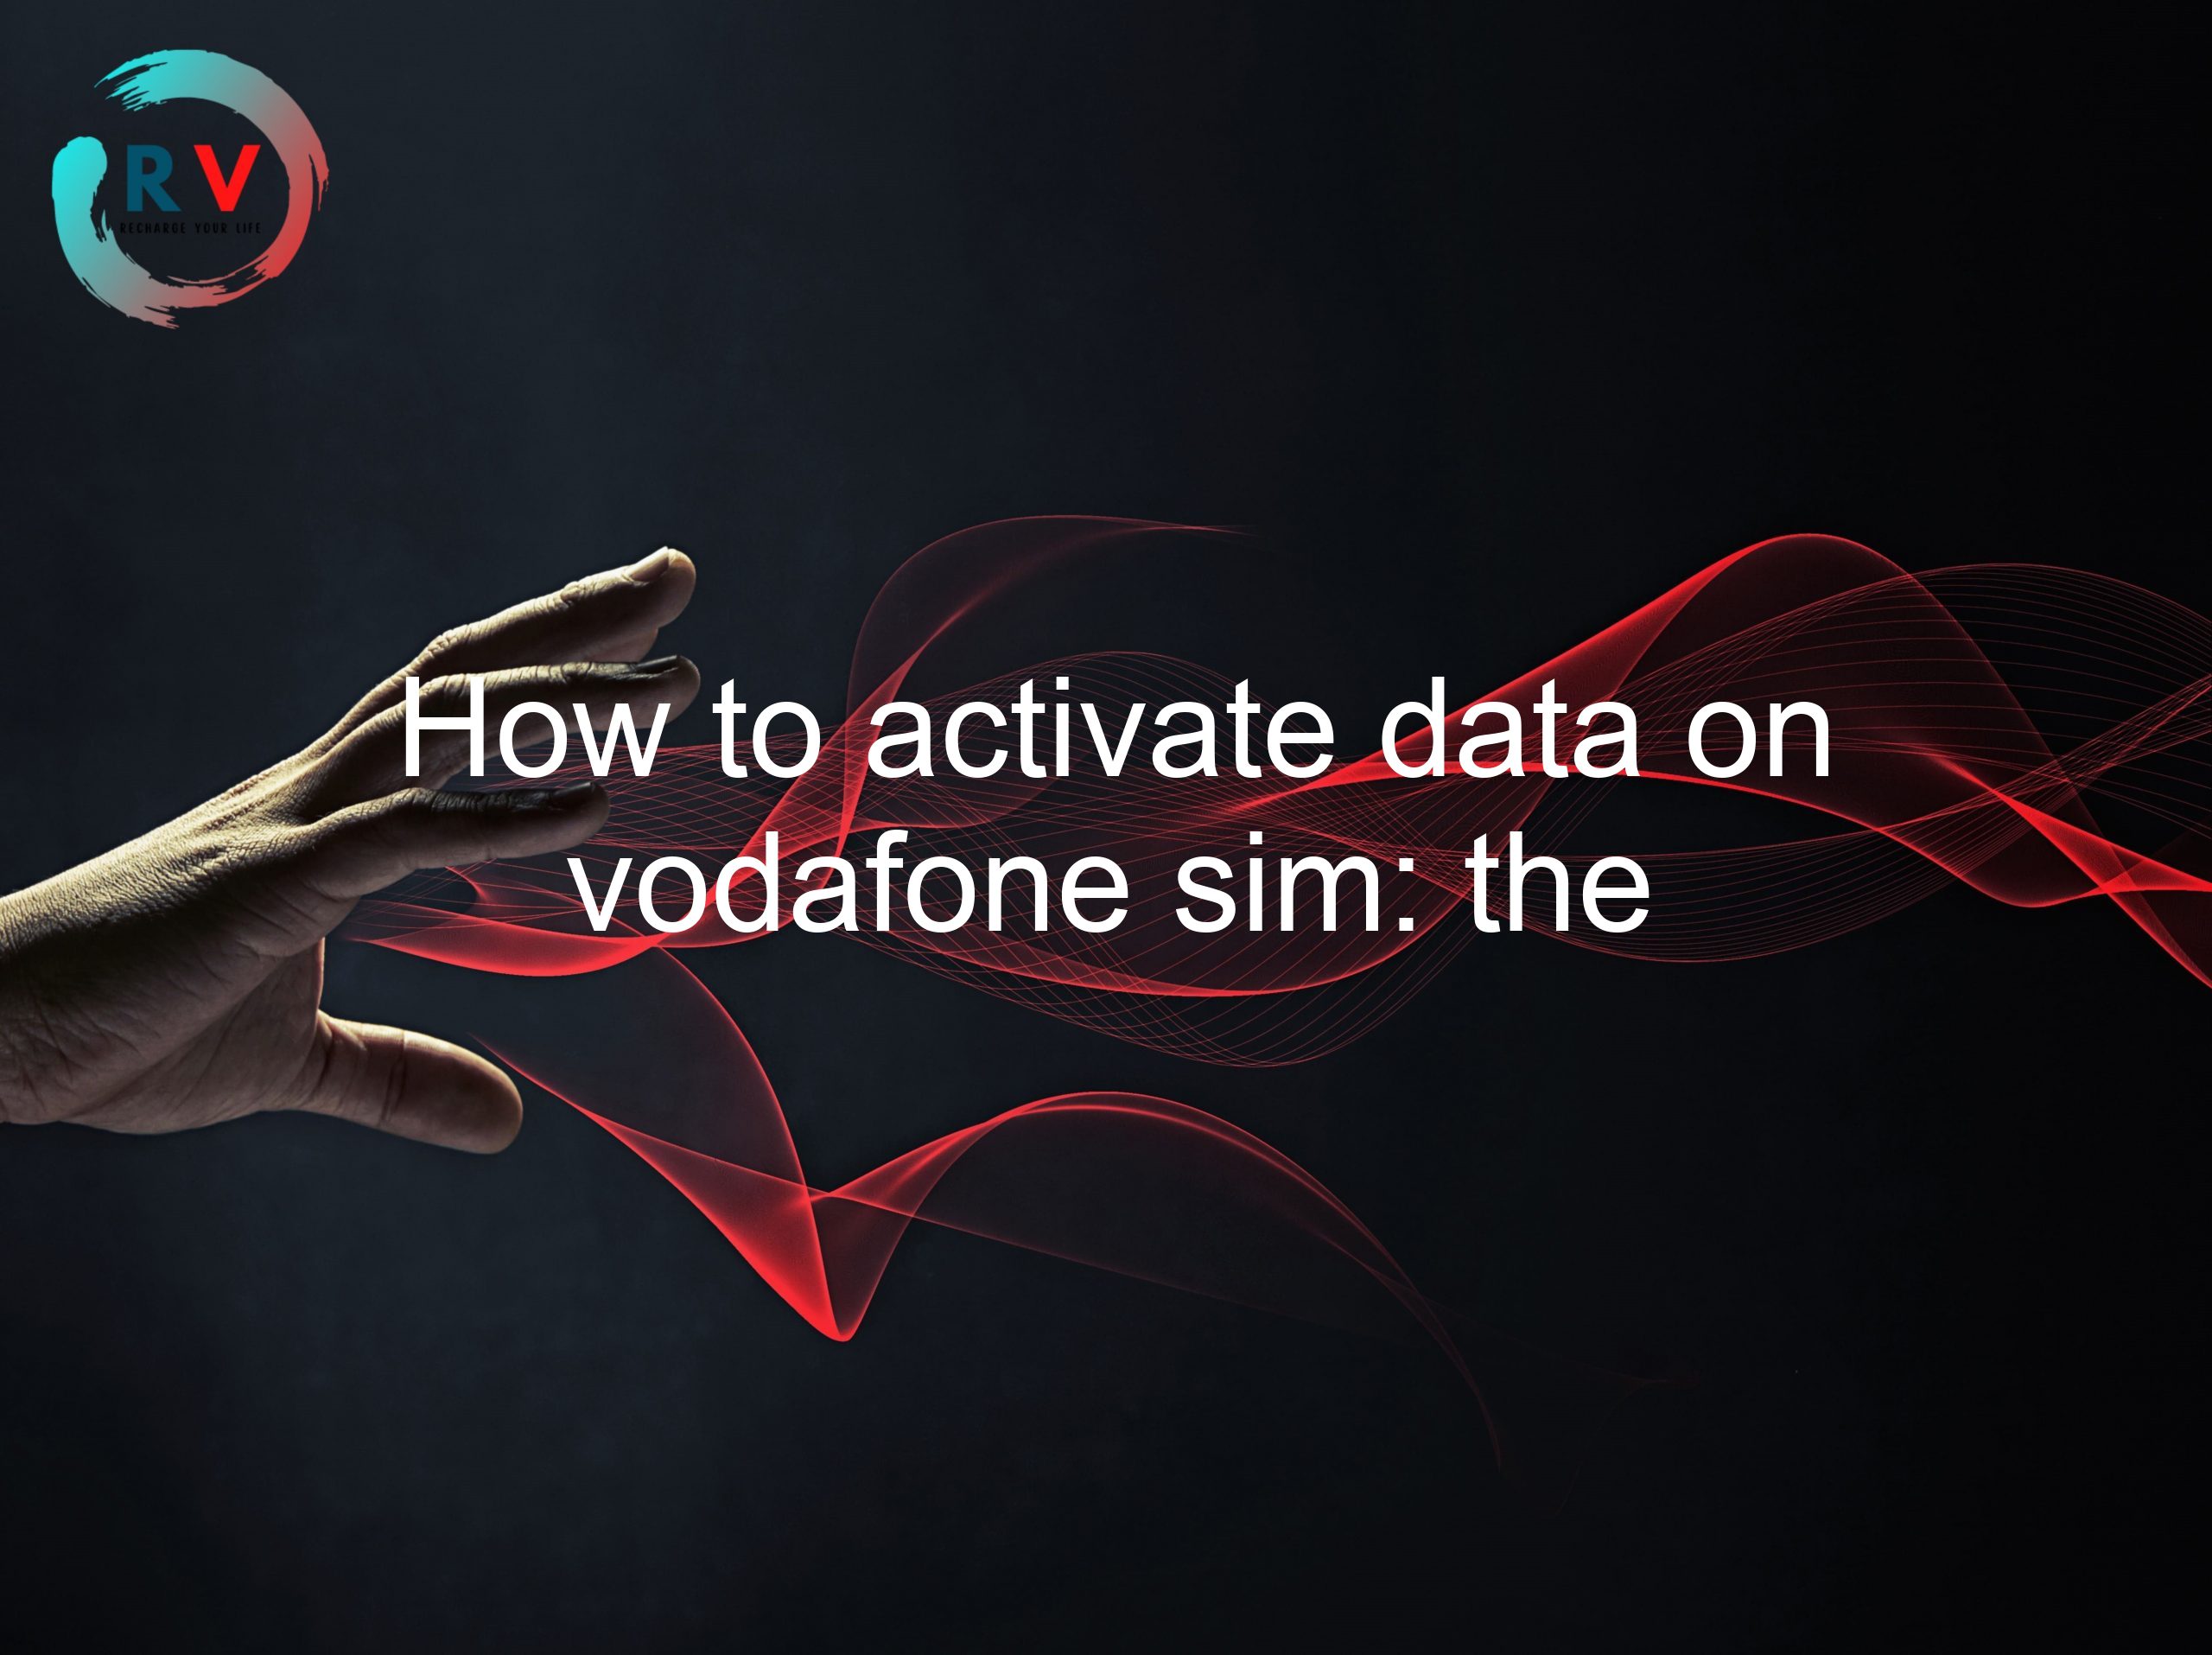 How to activate data on vodafone sim: the definitive guide